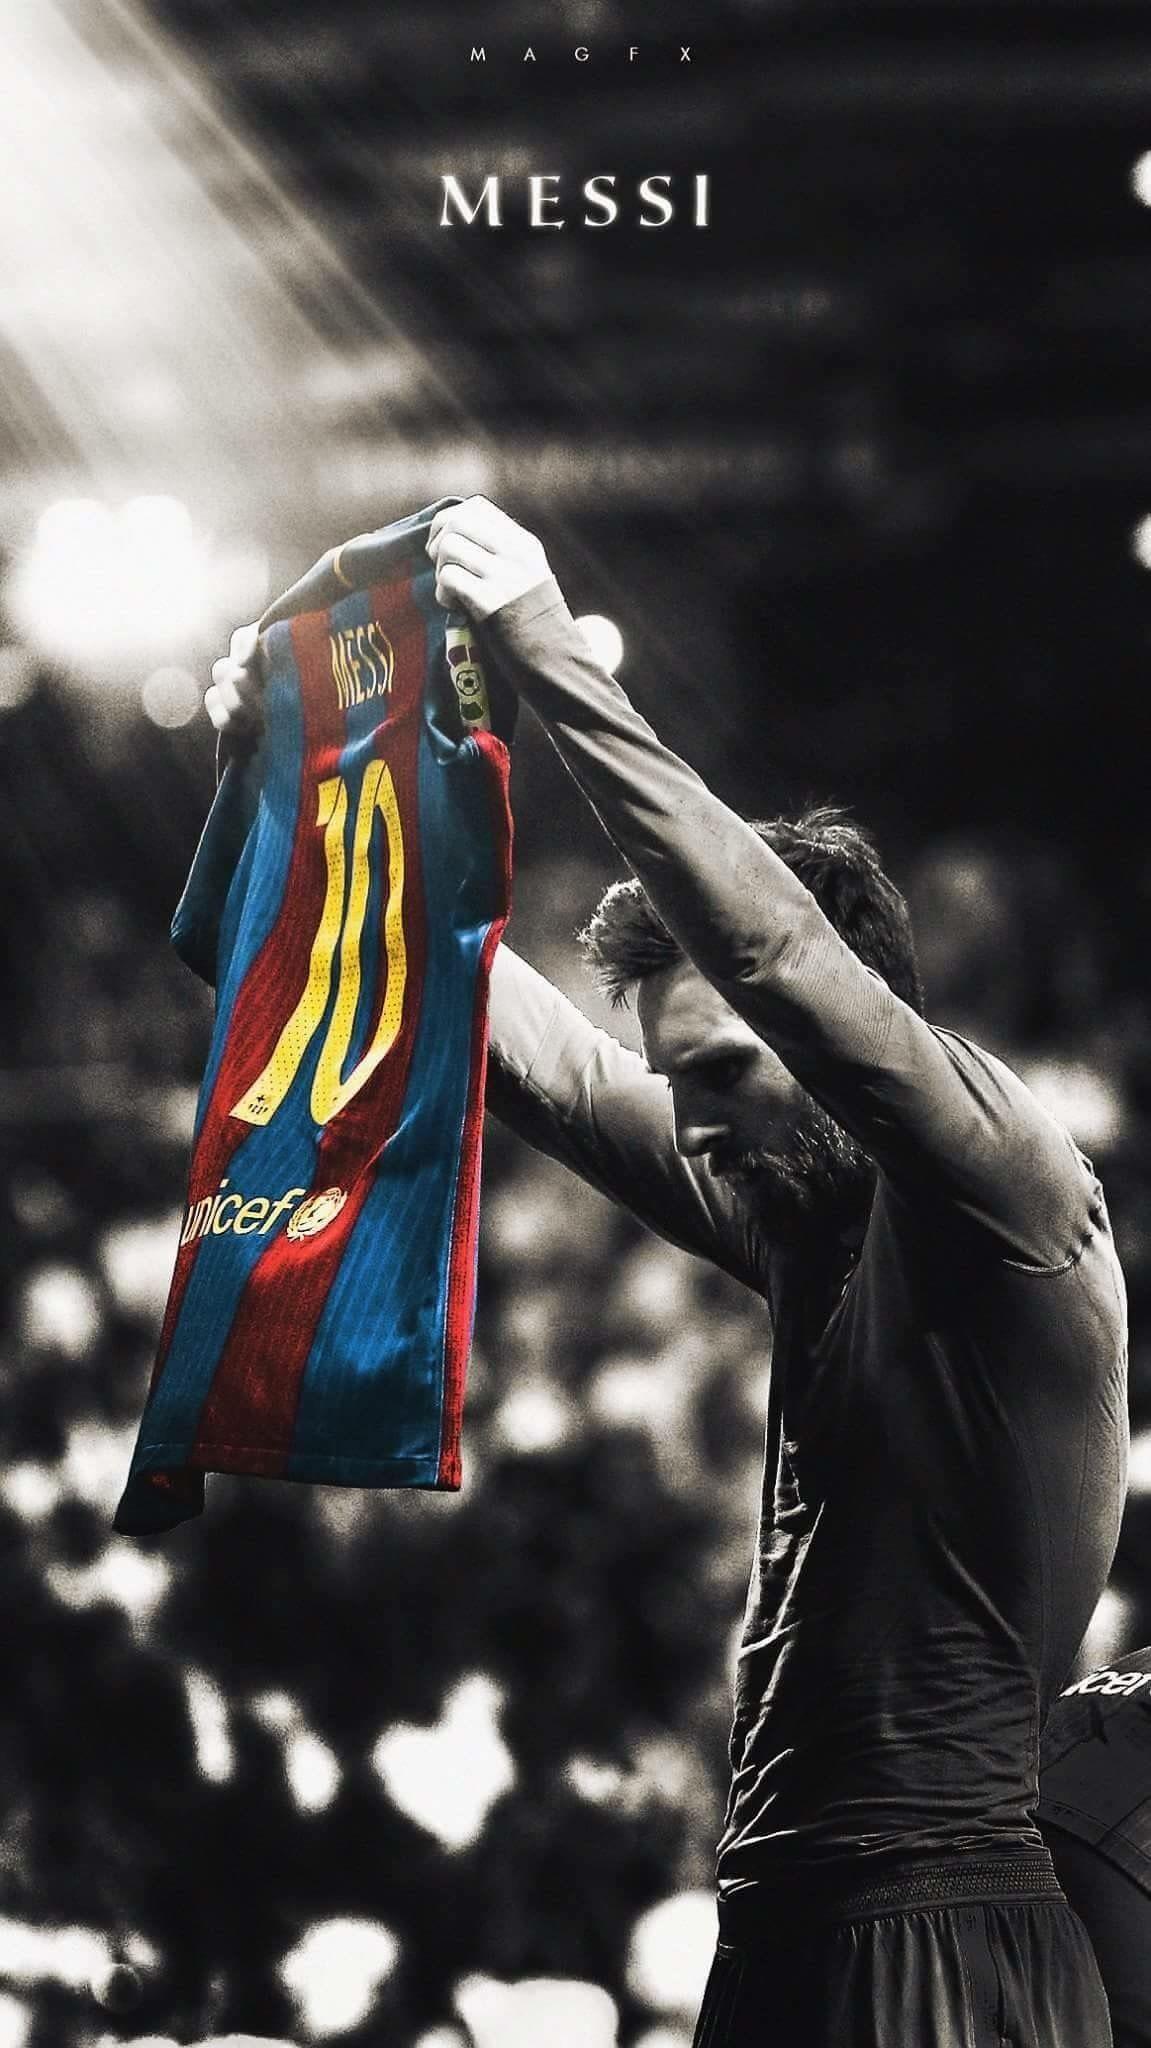 Messi Wallpaper / 124 Cool Lionel Messi Wallpaper Hd For Free Download